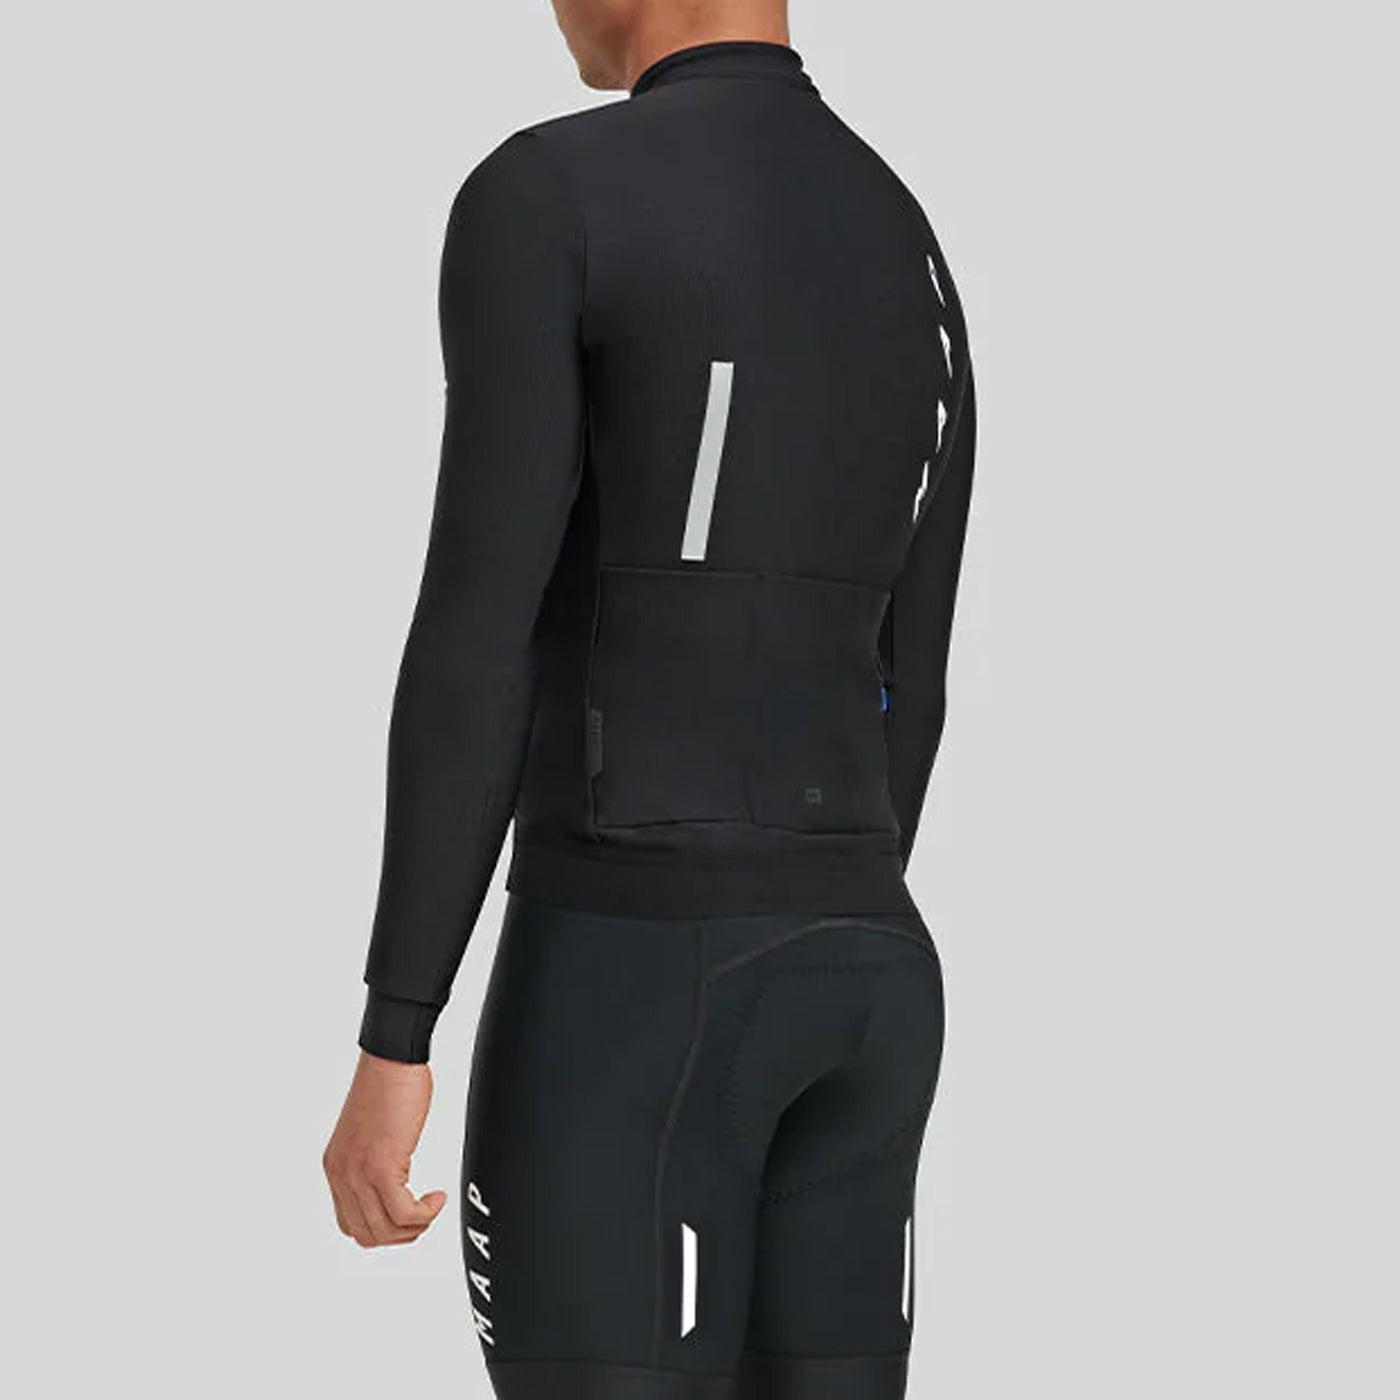 Maap Evade Thermal 2.0 long sleeve jersey - Black | All4cycling